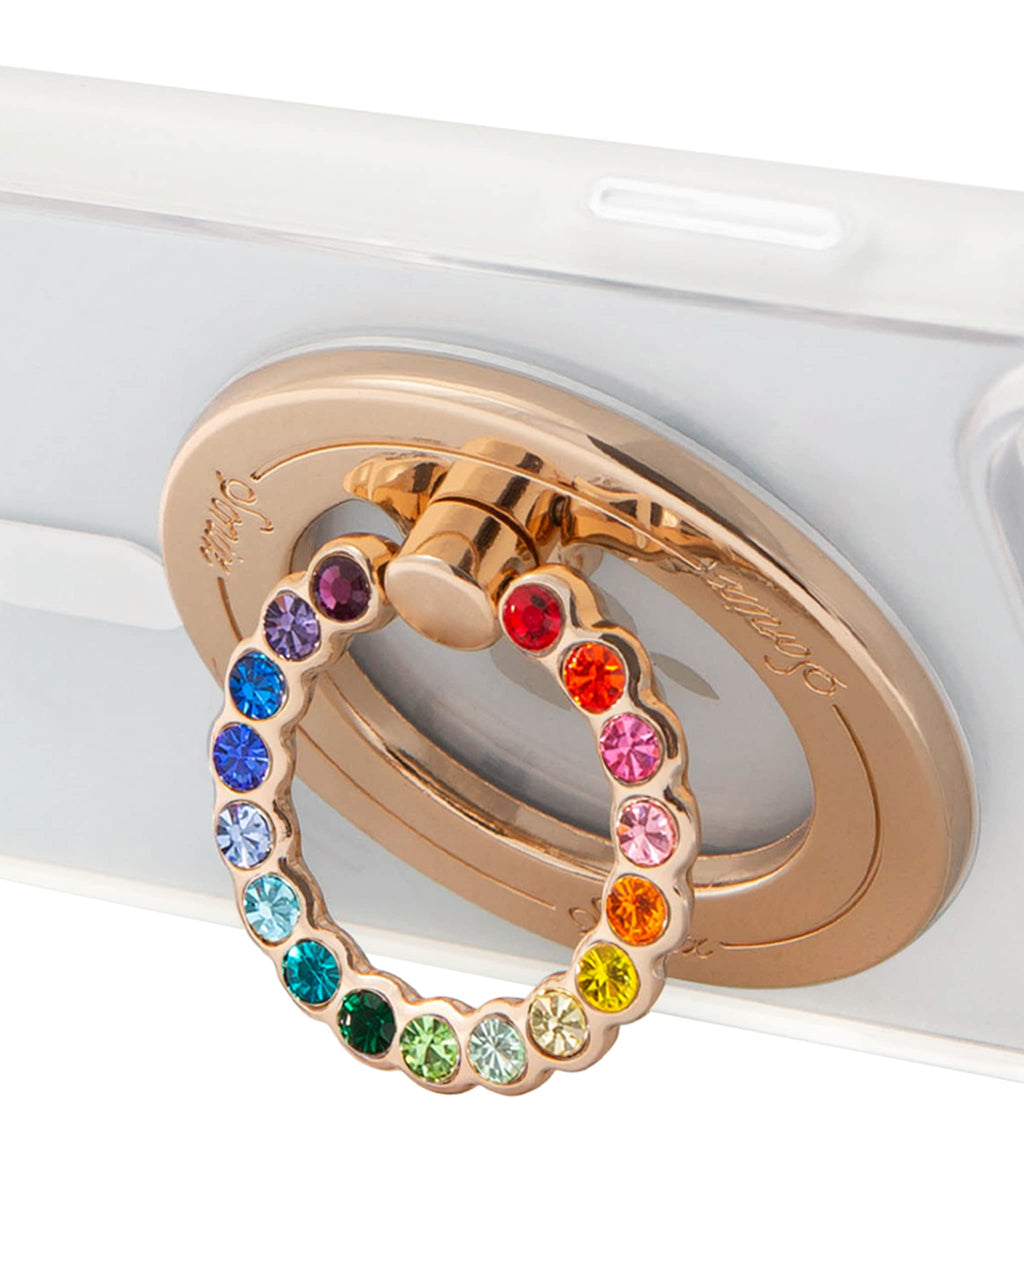 [Australia - AusPower] - Sonix Magnetic Phone Rings for MagSafe iPhone 13 Series and iPhone 12 Series, Adjustable Removable Finger Ring Grip Holder and Stand (Gold, Rainbow Rhinestone Crystal) Gold/Rainbow 